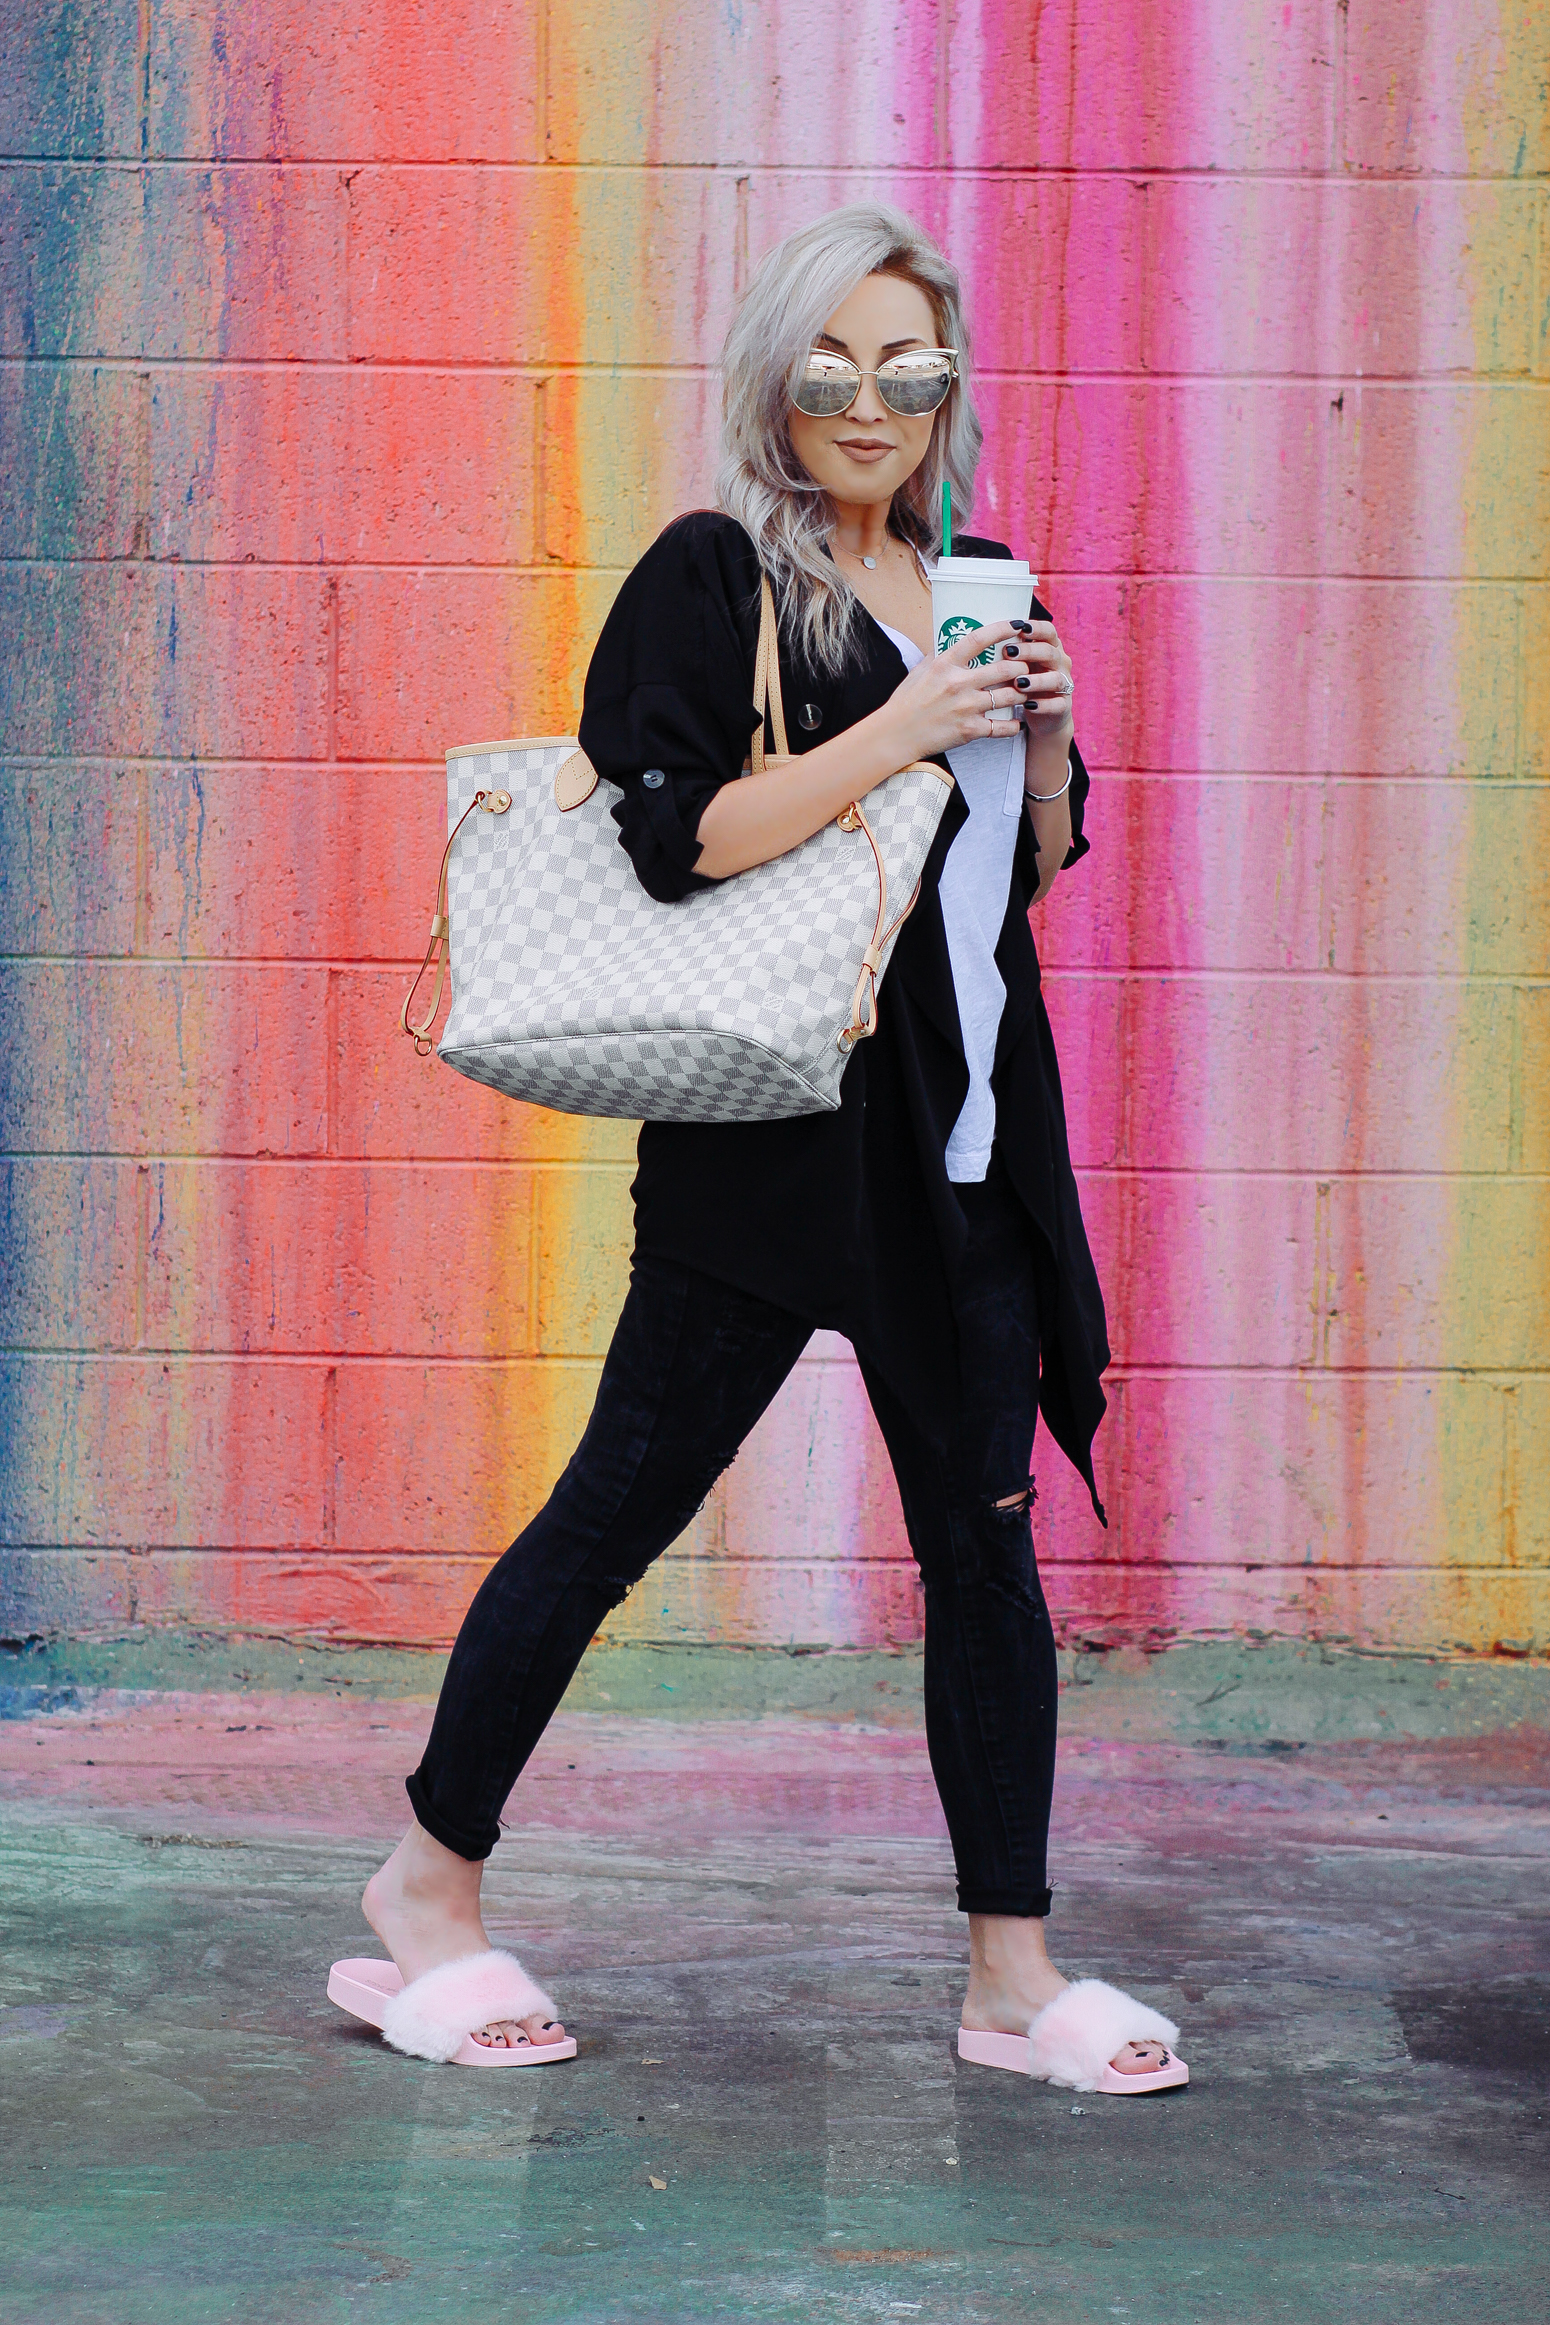 Blondie in the City | Checkered Louis Vuitton Neverfull Bag | Pink Fuzzy Slippers | Mirrored Sunglasses